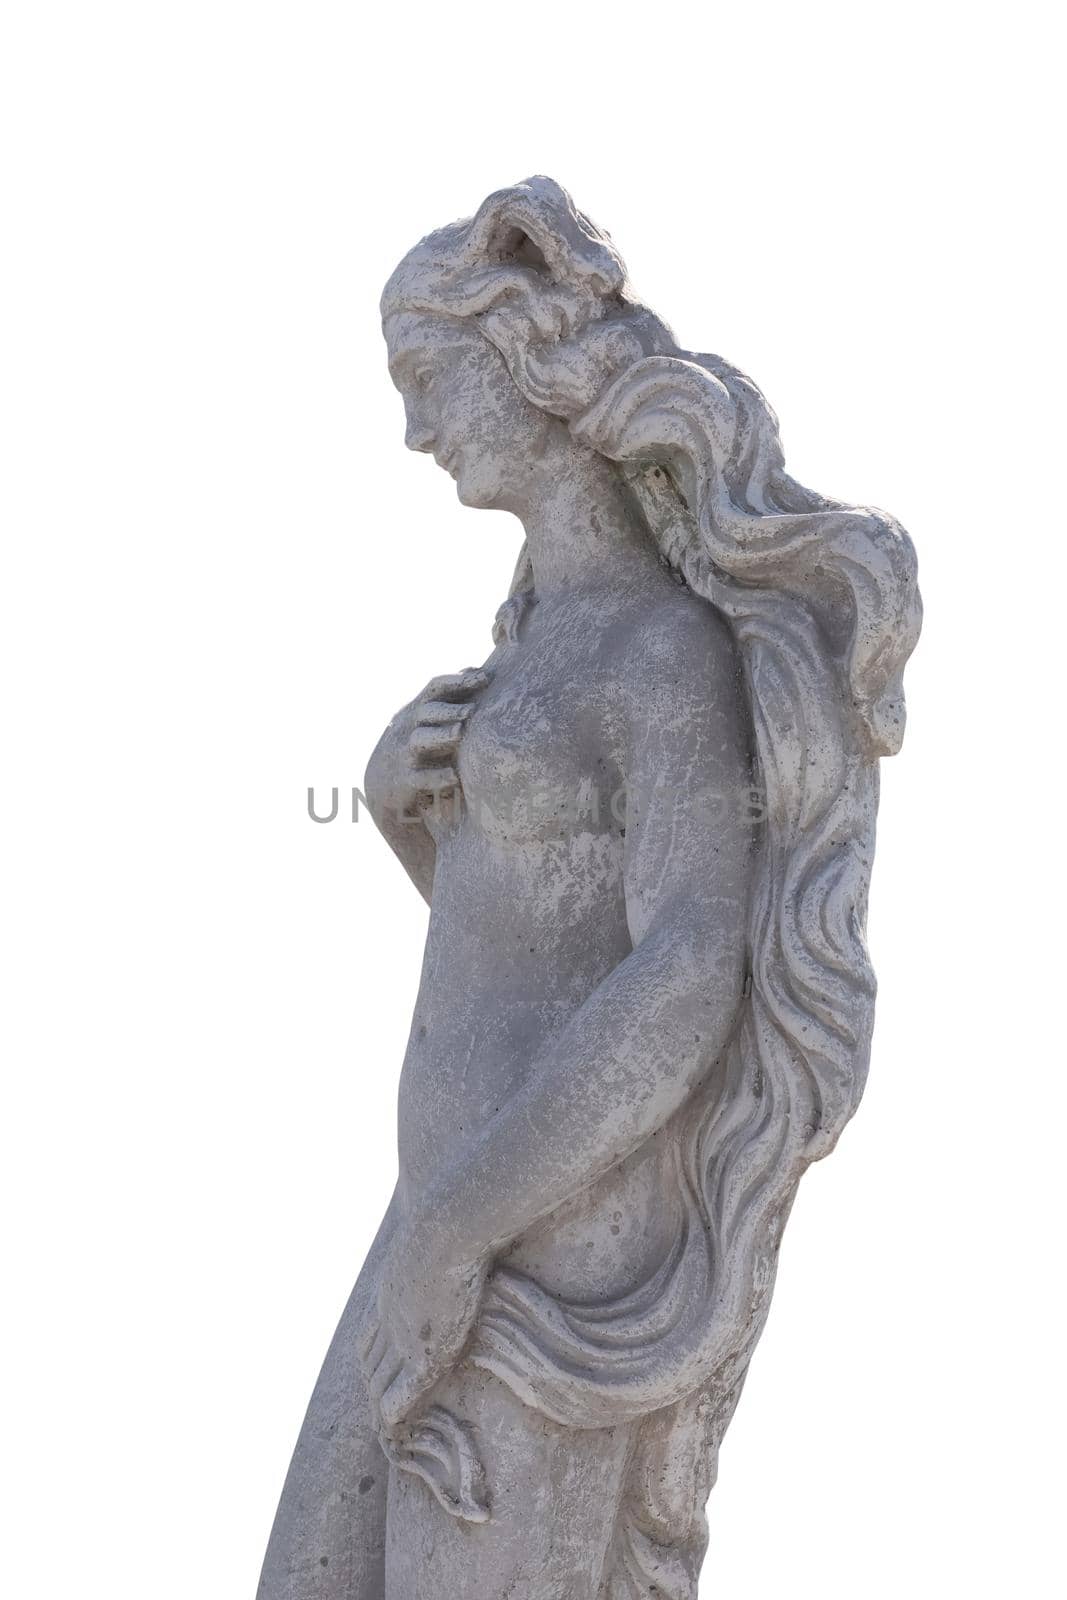 Side view of stone sculpture of naked woman on white background. art and classical style romantic figurative stone sculpture.